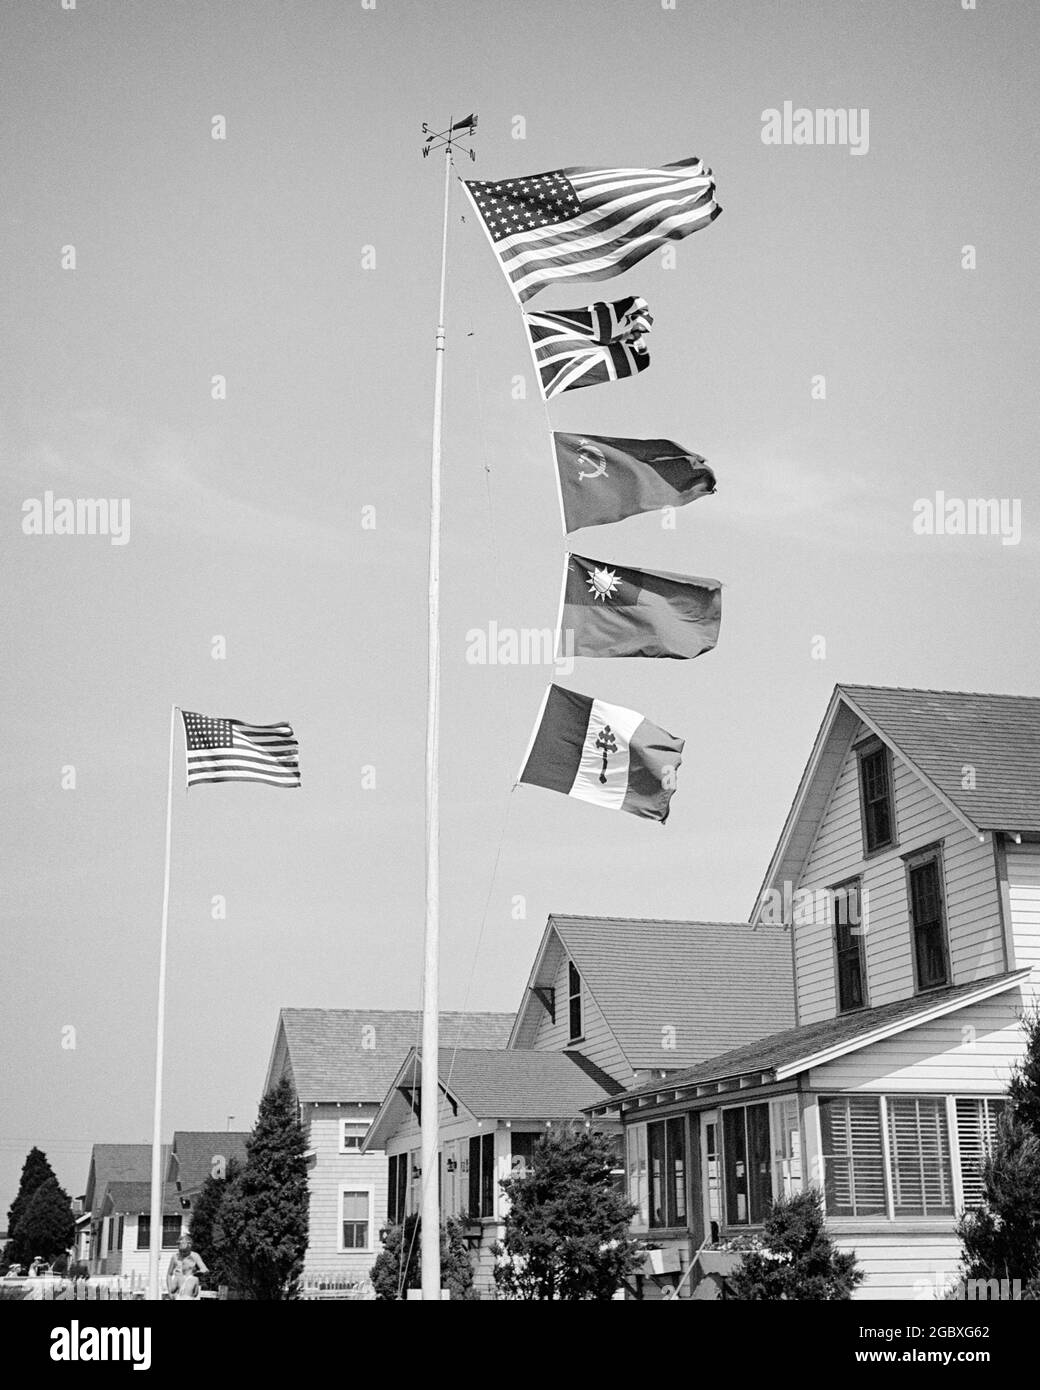 1940s FLYING FLAGS OF THE SECOND WORLD WAR ALLIED COUNTRIES UNITED STATES BRITISH EMPIRE SOVIET UNION CHINA AND FREE FRENCH  - h1386 HAR001 HARS AND LEADERSHIP LOW ANGLE POWERFUL WORLD WARS PRIDE WORLD WAR WORLD WAR TWO WORLD WAR II OF THE FREE POLITICS CONCEPT CONCEPTUAL SOVIET UNION STARS AND STRIPES STYLISH SUPPORT WORLD WAR 2 UNIFIED OLD GLORY SYMBOLIC BRITISH EMPIRE CONCEPTS COOPERATION FLAG POLE RED WHITE AND BLUE TOGETHERNESS ALLIED BLACK AND WHITE COUNTRIES GREAT BRITAIN HAR001 OLD FASHIONED REPRESENTATION UNITED KINGDOM USSR Stock Photo